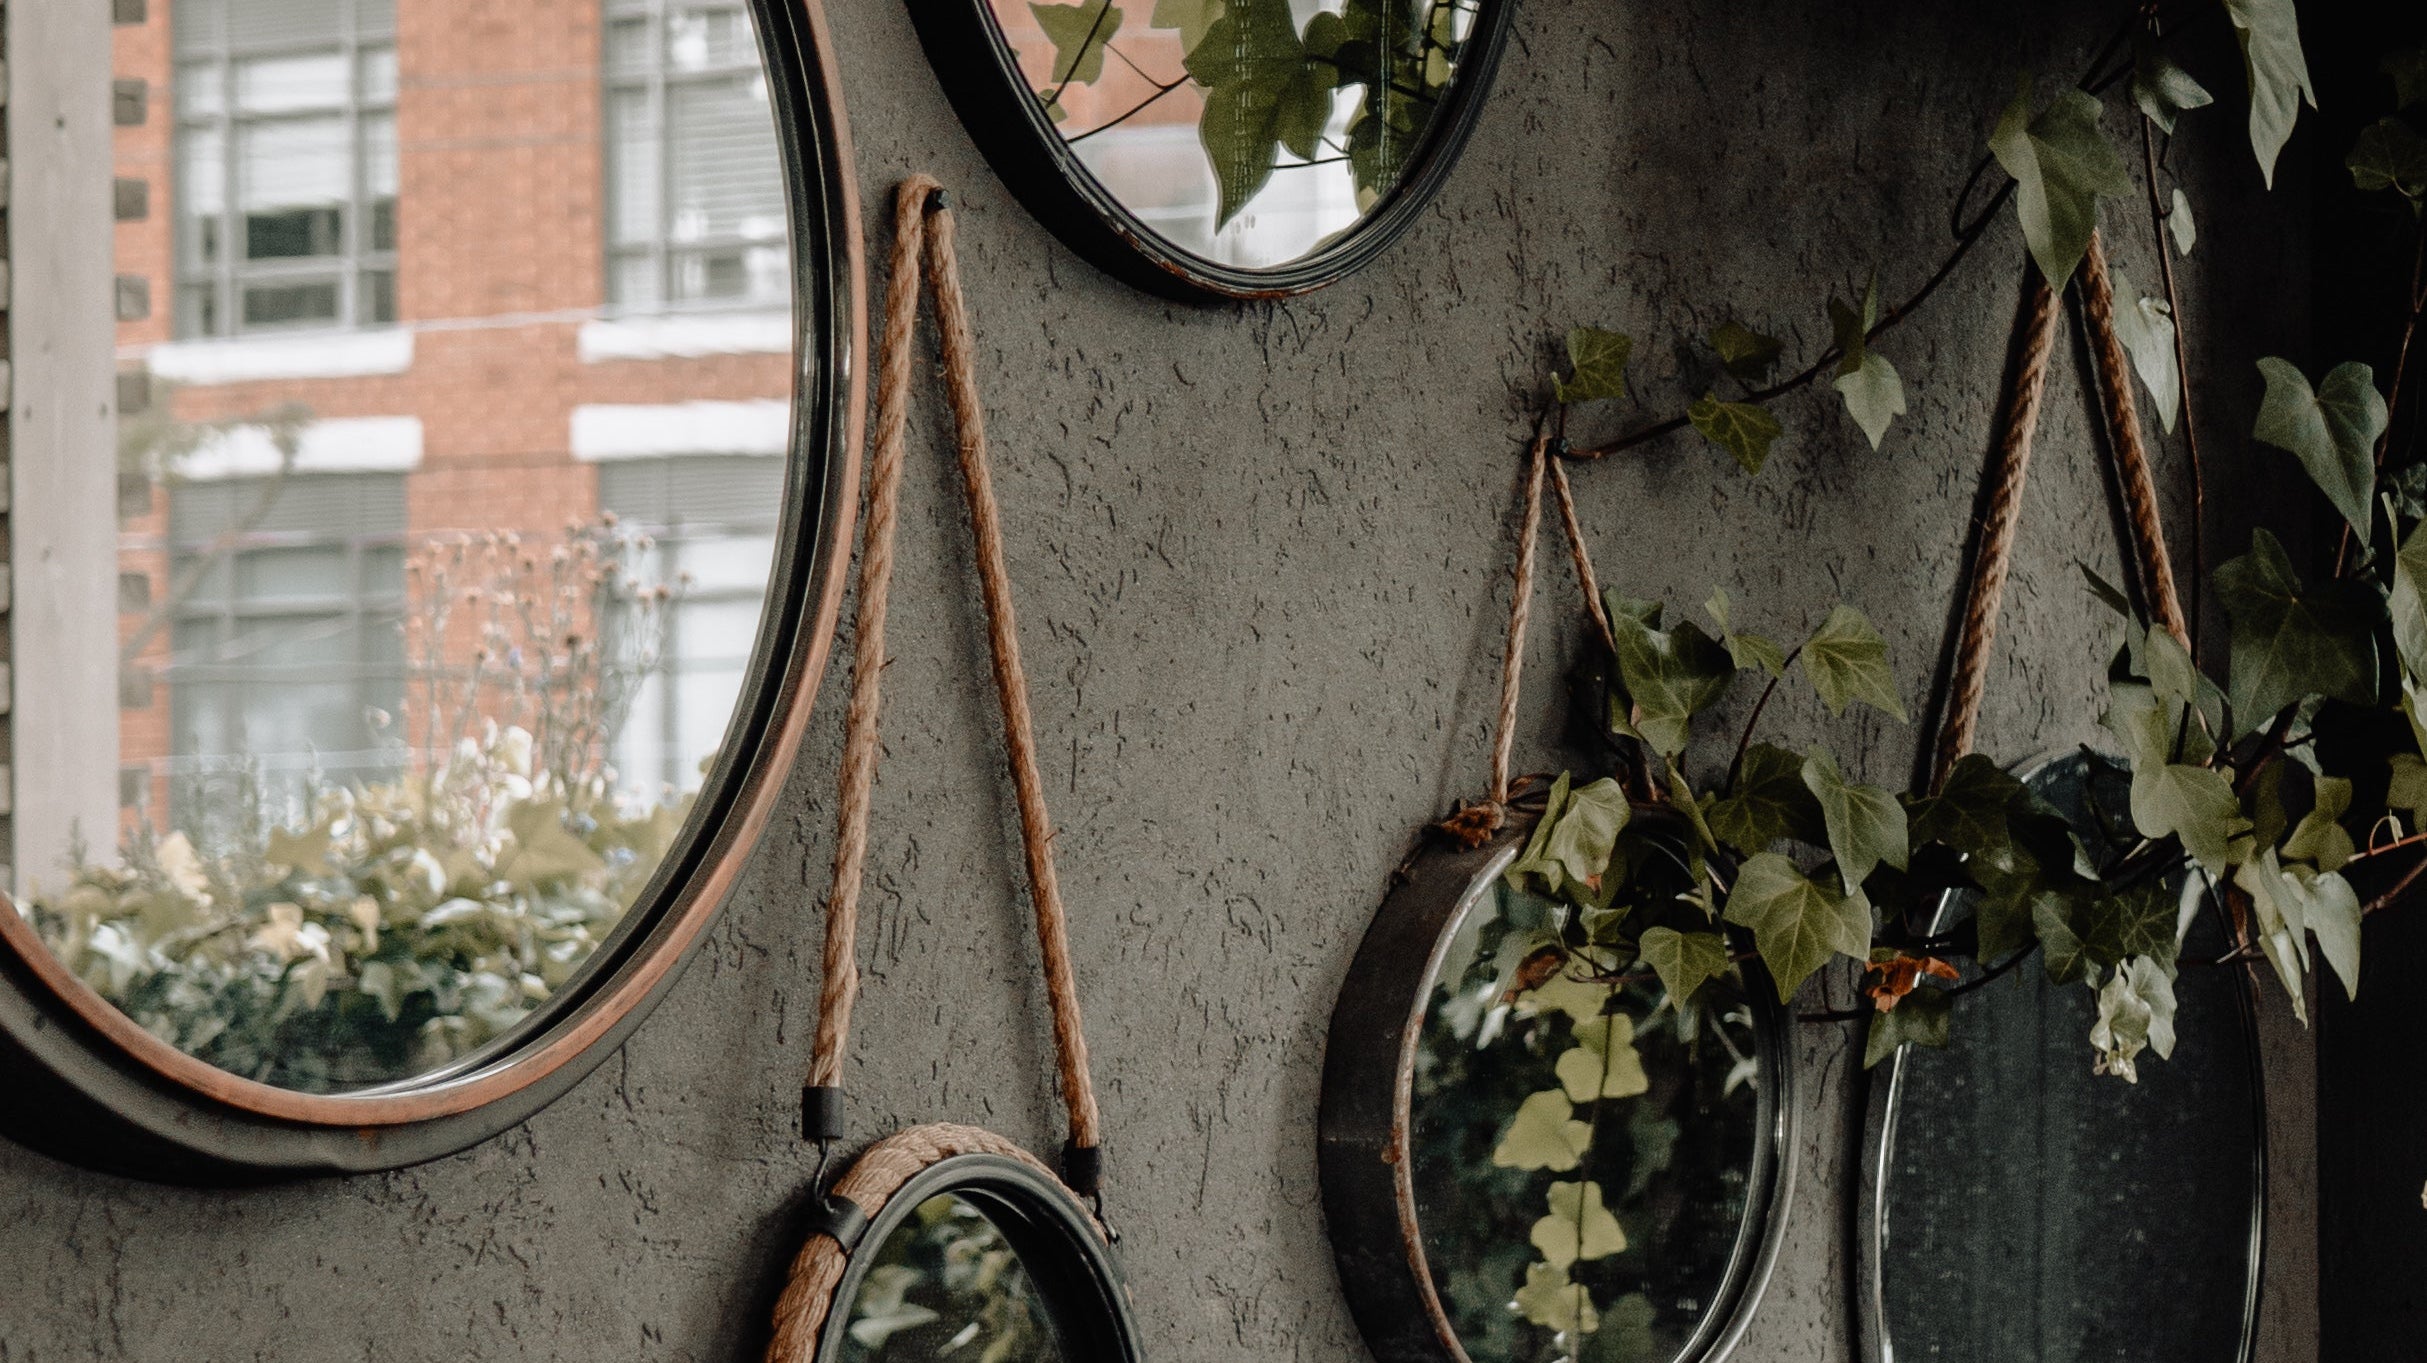 decorate with mirrors